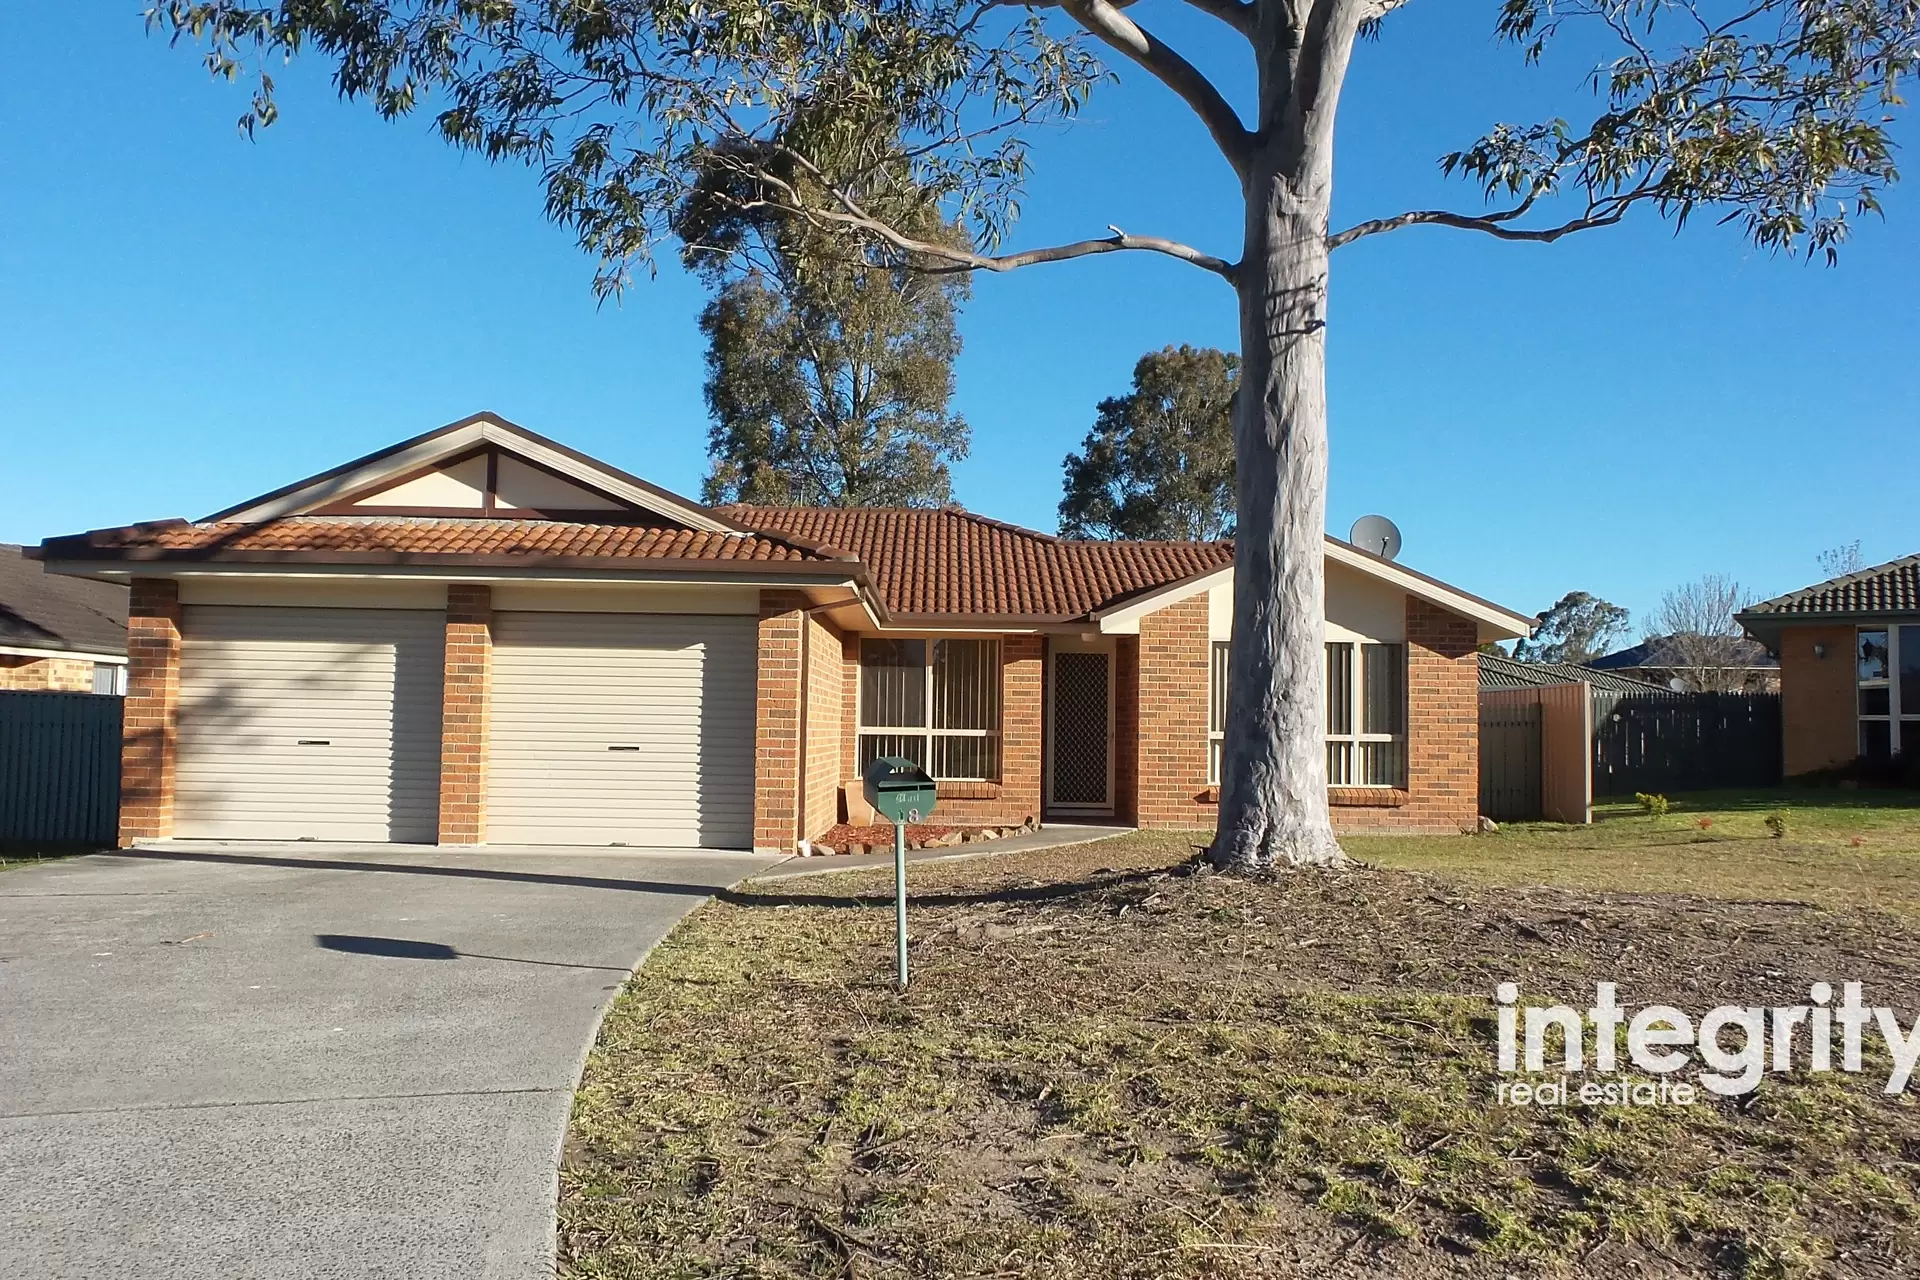 18 Hermes Crescent, Worrigee For Lease by Integrity Real Estate